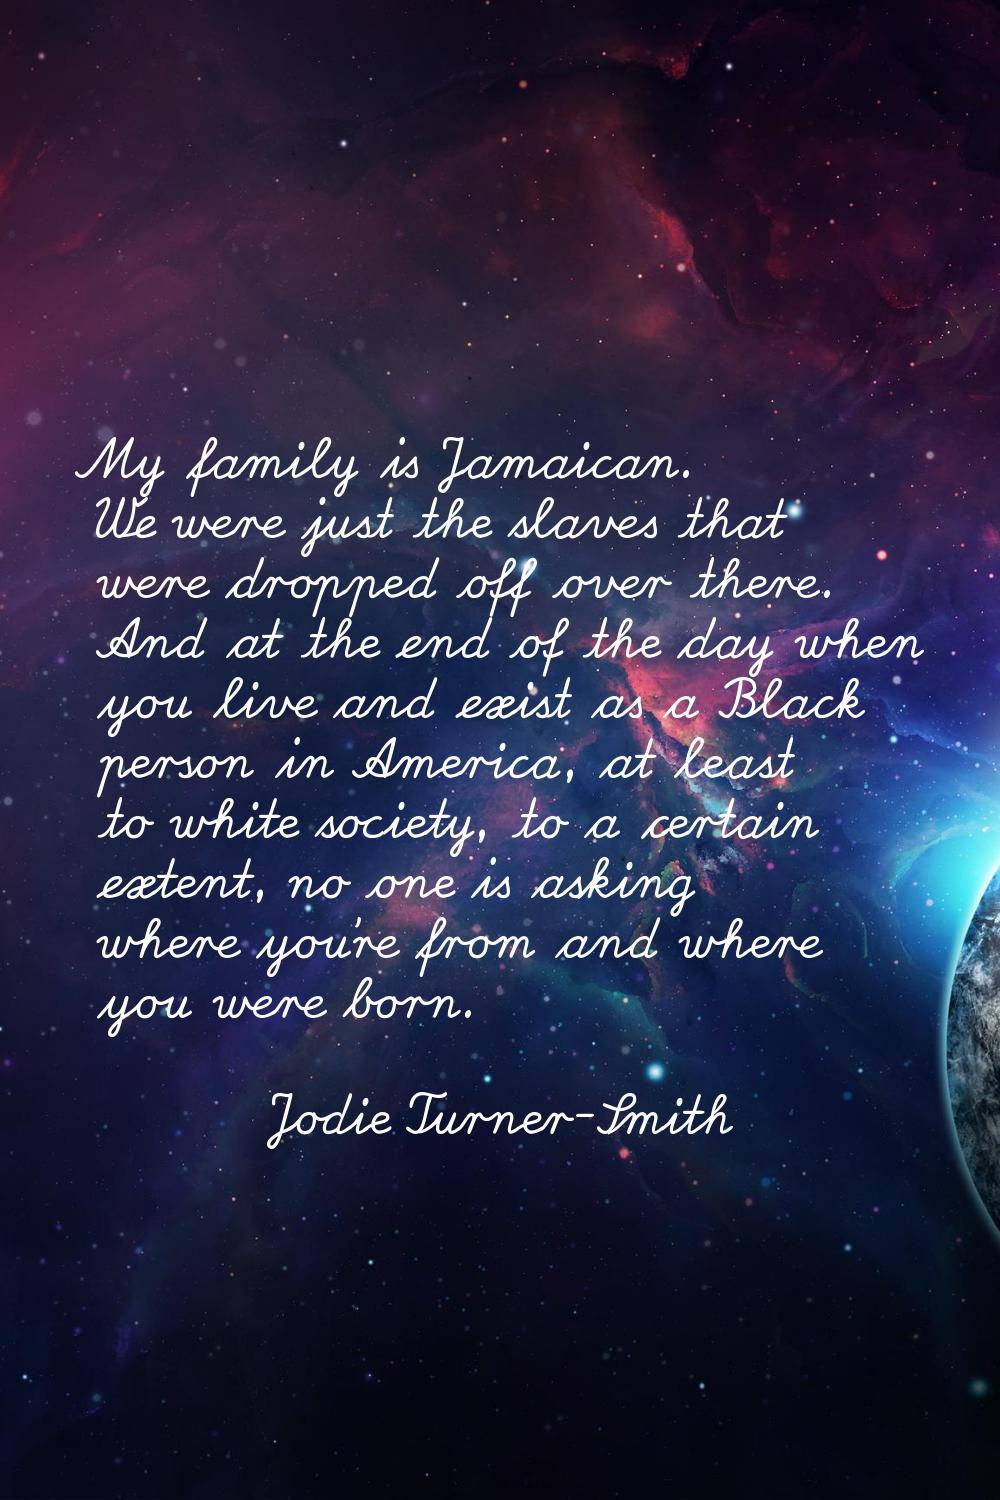 My family is Jamaican. We were just the slaves that were dropped off over there. And at the end of 